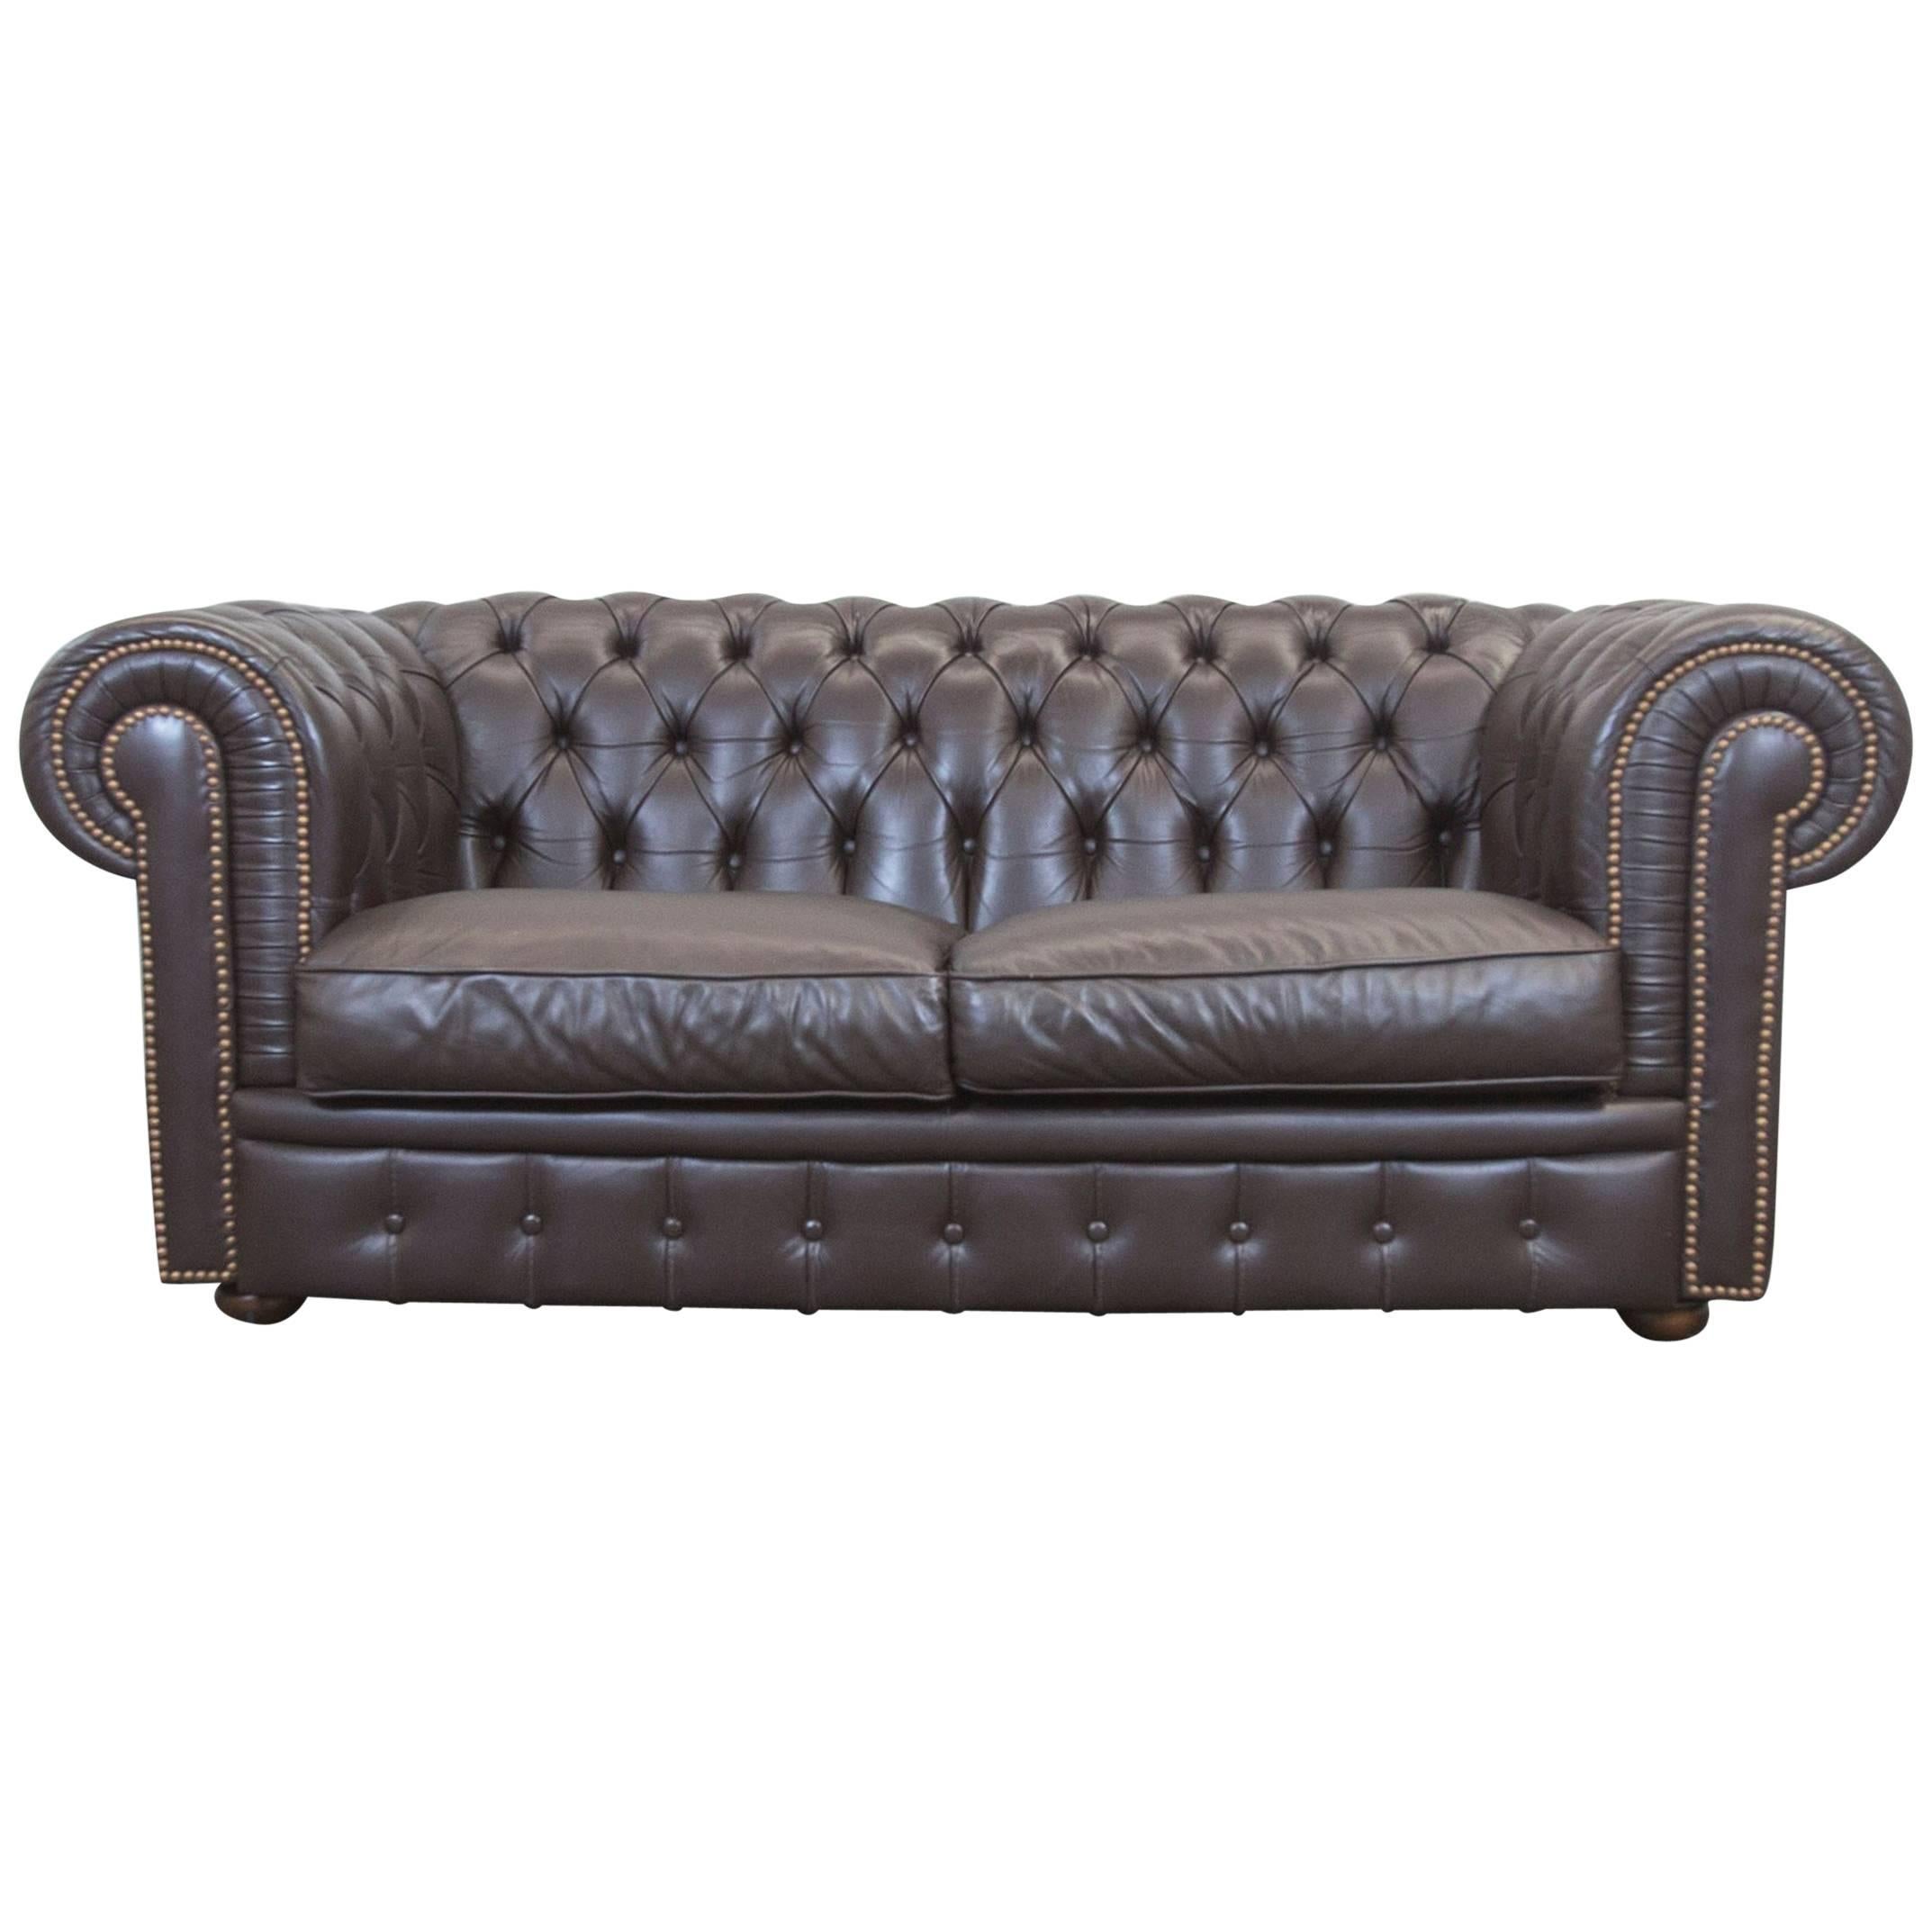 Calia Chesterfield Sofa Brown Leather Three-Seat Couch Vintage Retro